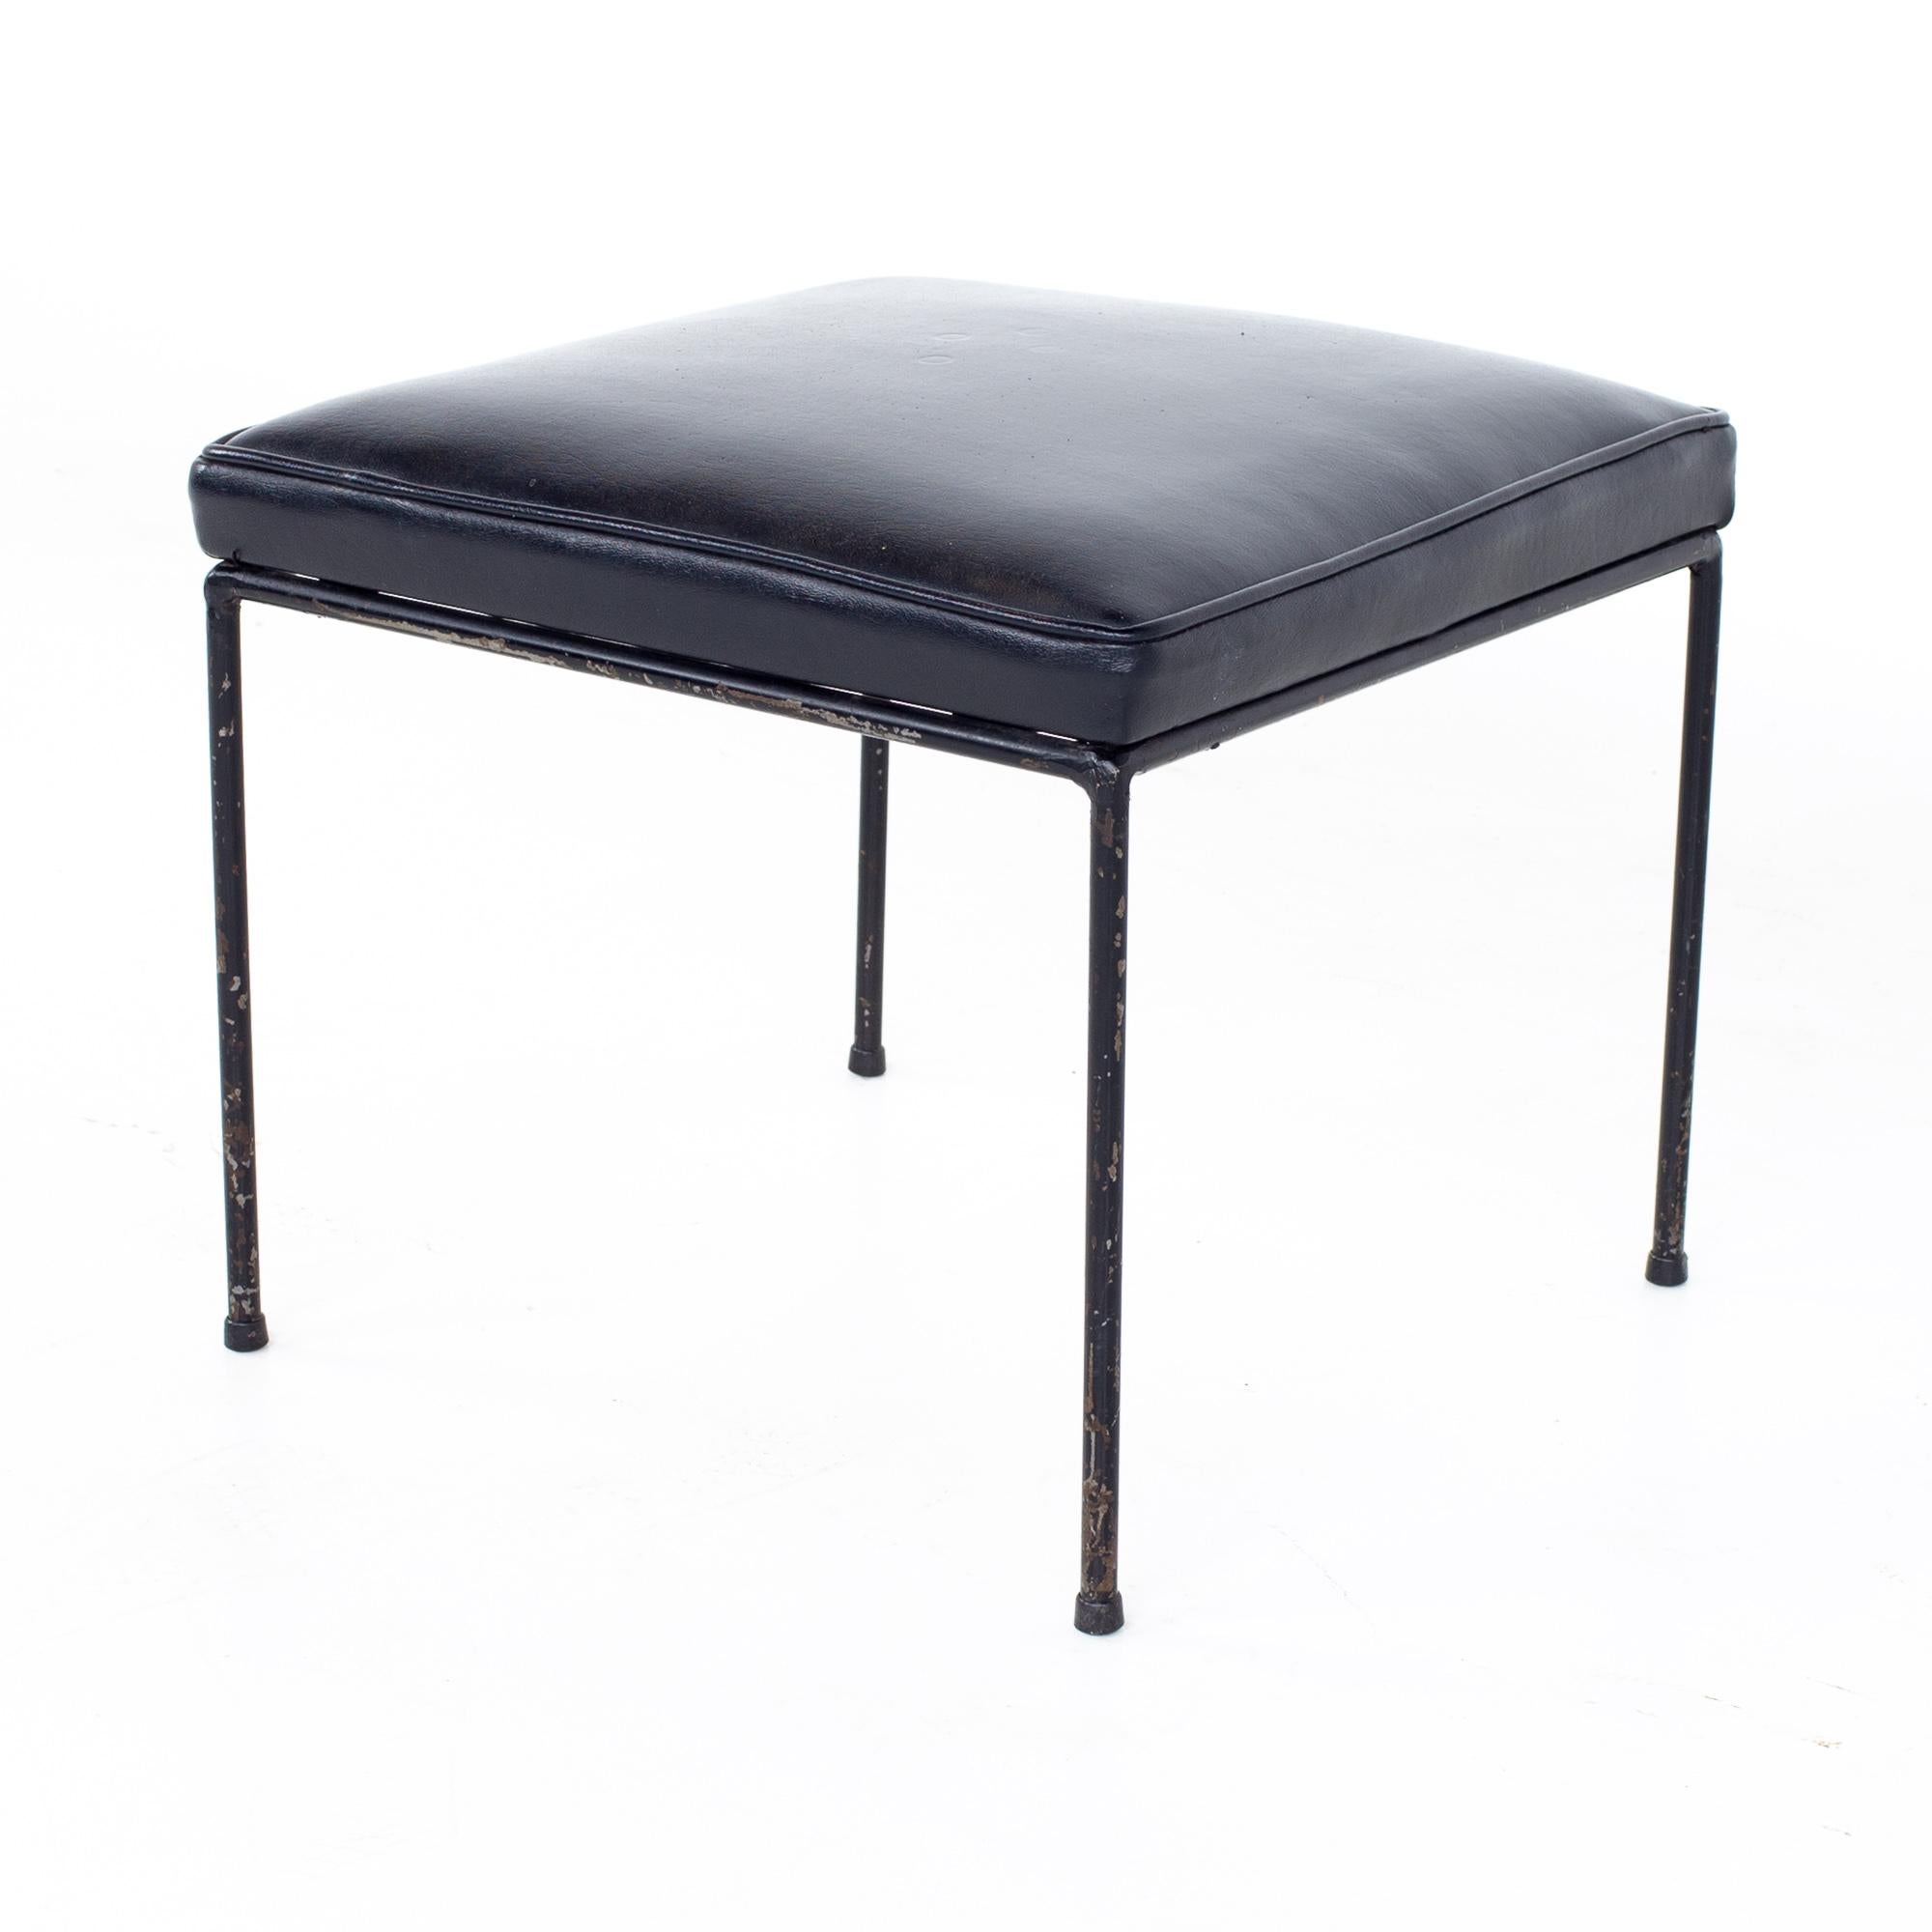 Paul McCobb Mid Century upholstered iron ottoman stool
Ottoman measures: 16.5 wide x 16.5 deep x 14.5 inches high

All pieces of furniture can be had in what we call restored vintage condition. That means the piece is restored upon purchase so